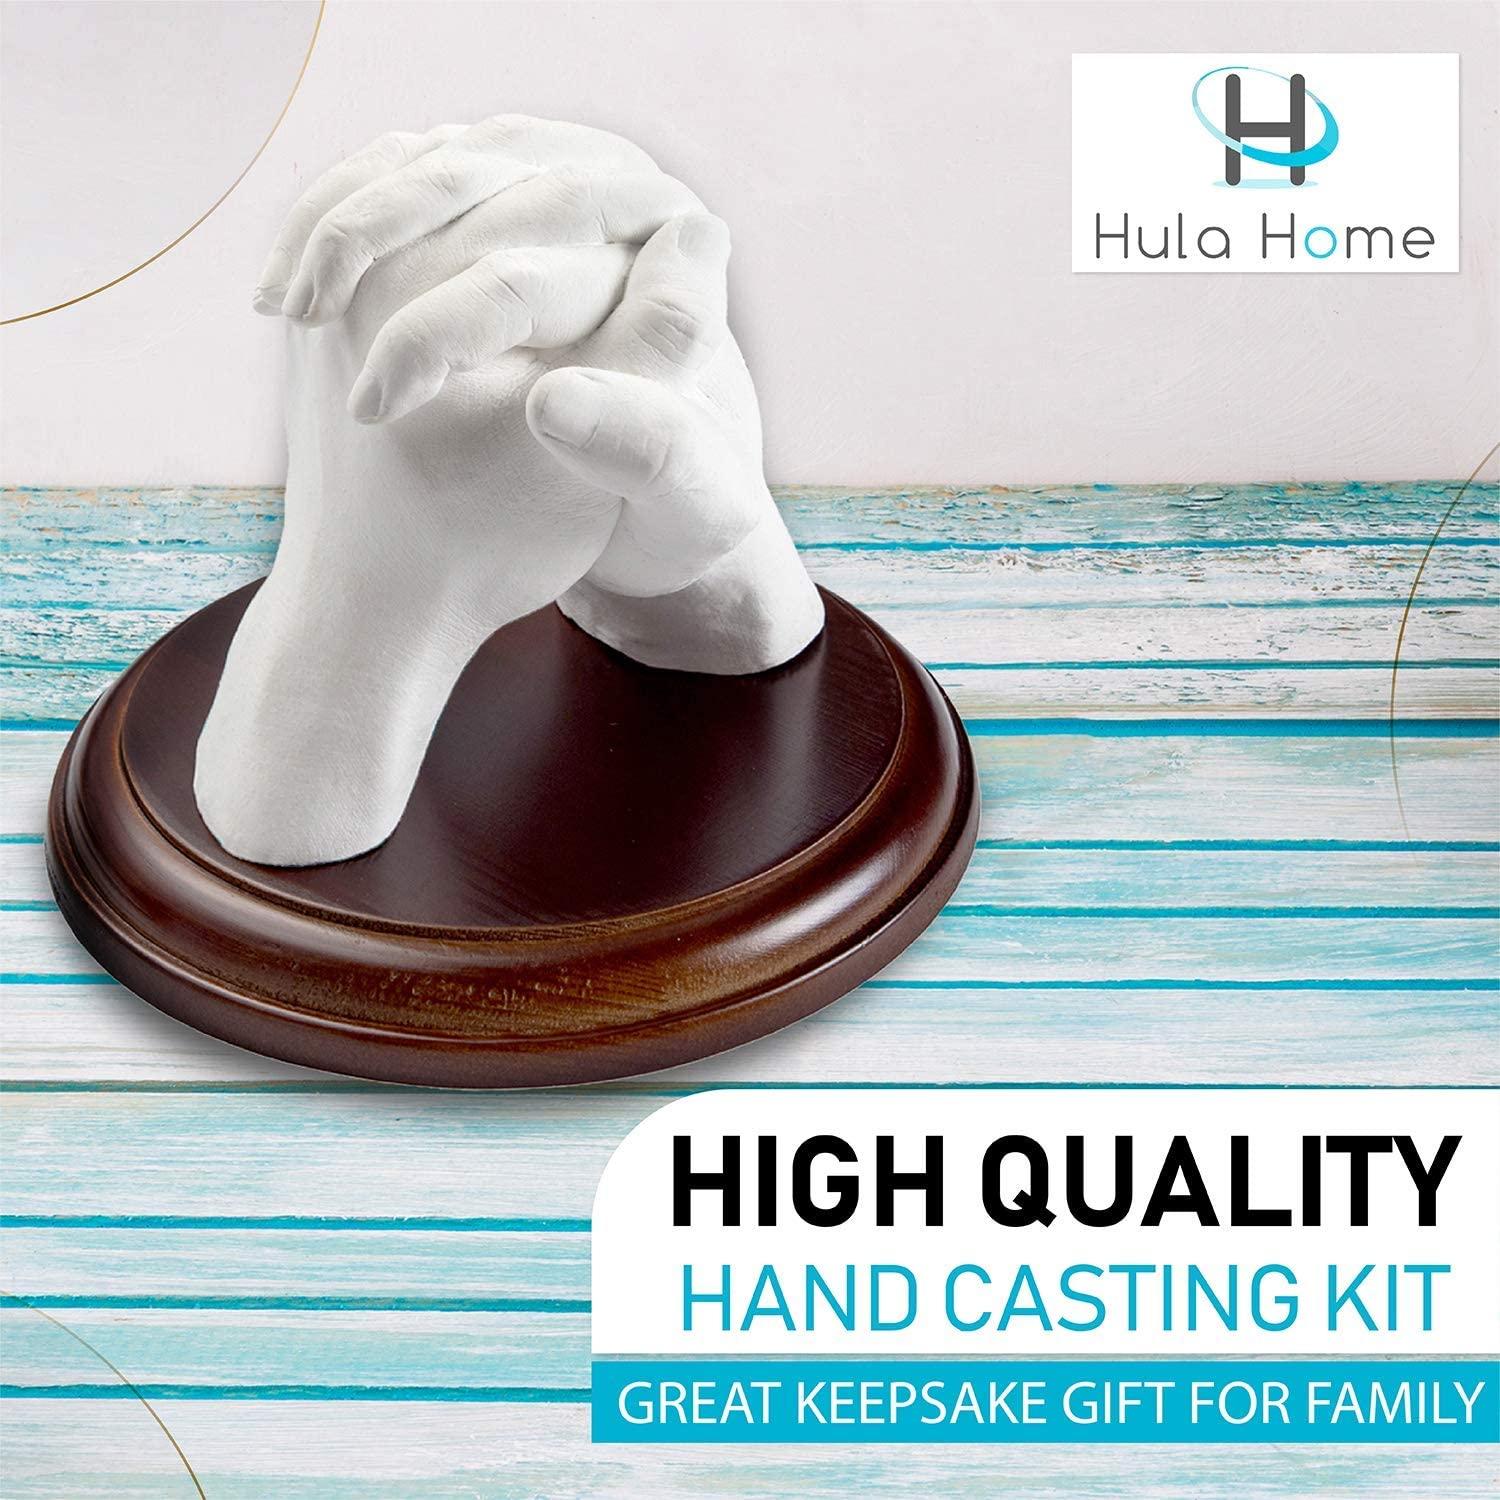 Hand Casting Kit for Couples or Family, Mounting Plaque Included